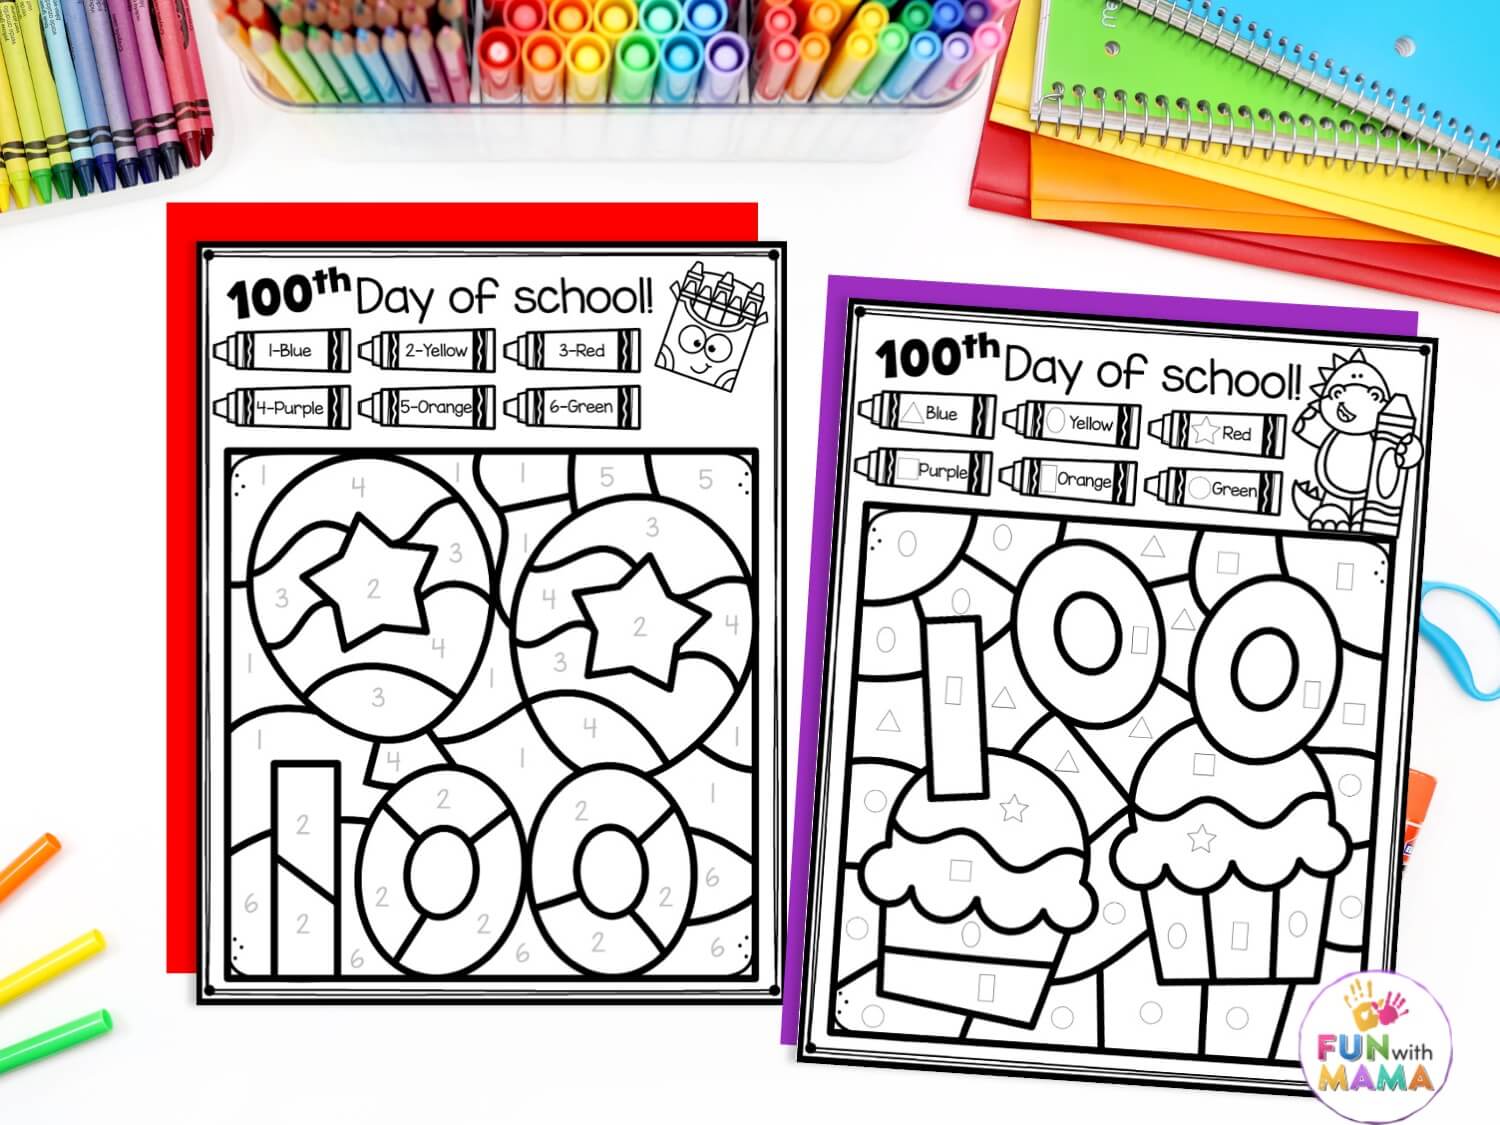 100th-day-coloring-activity